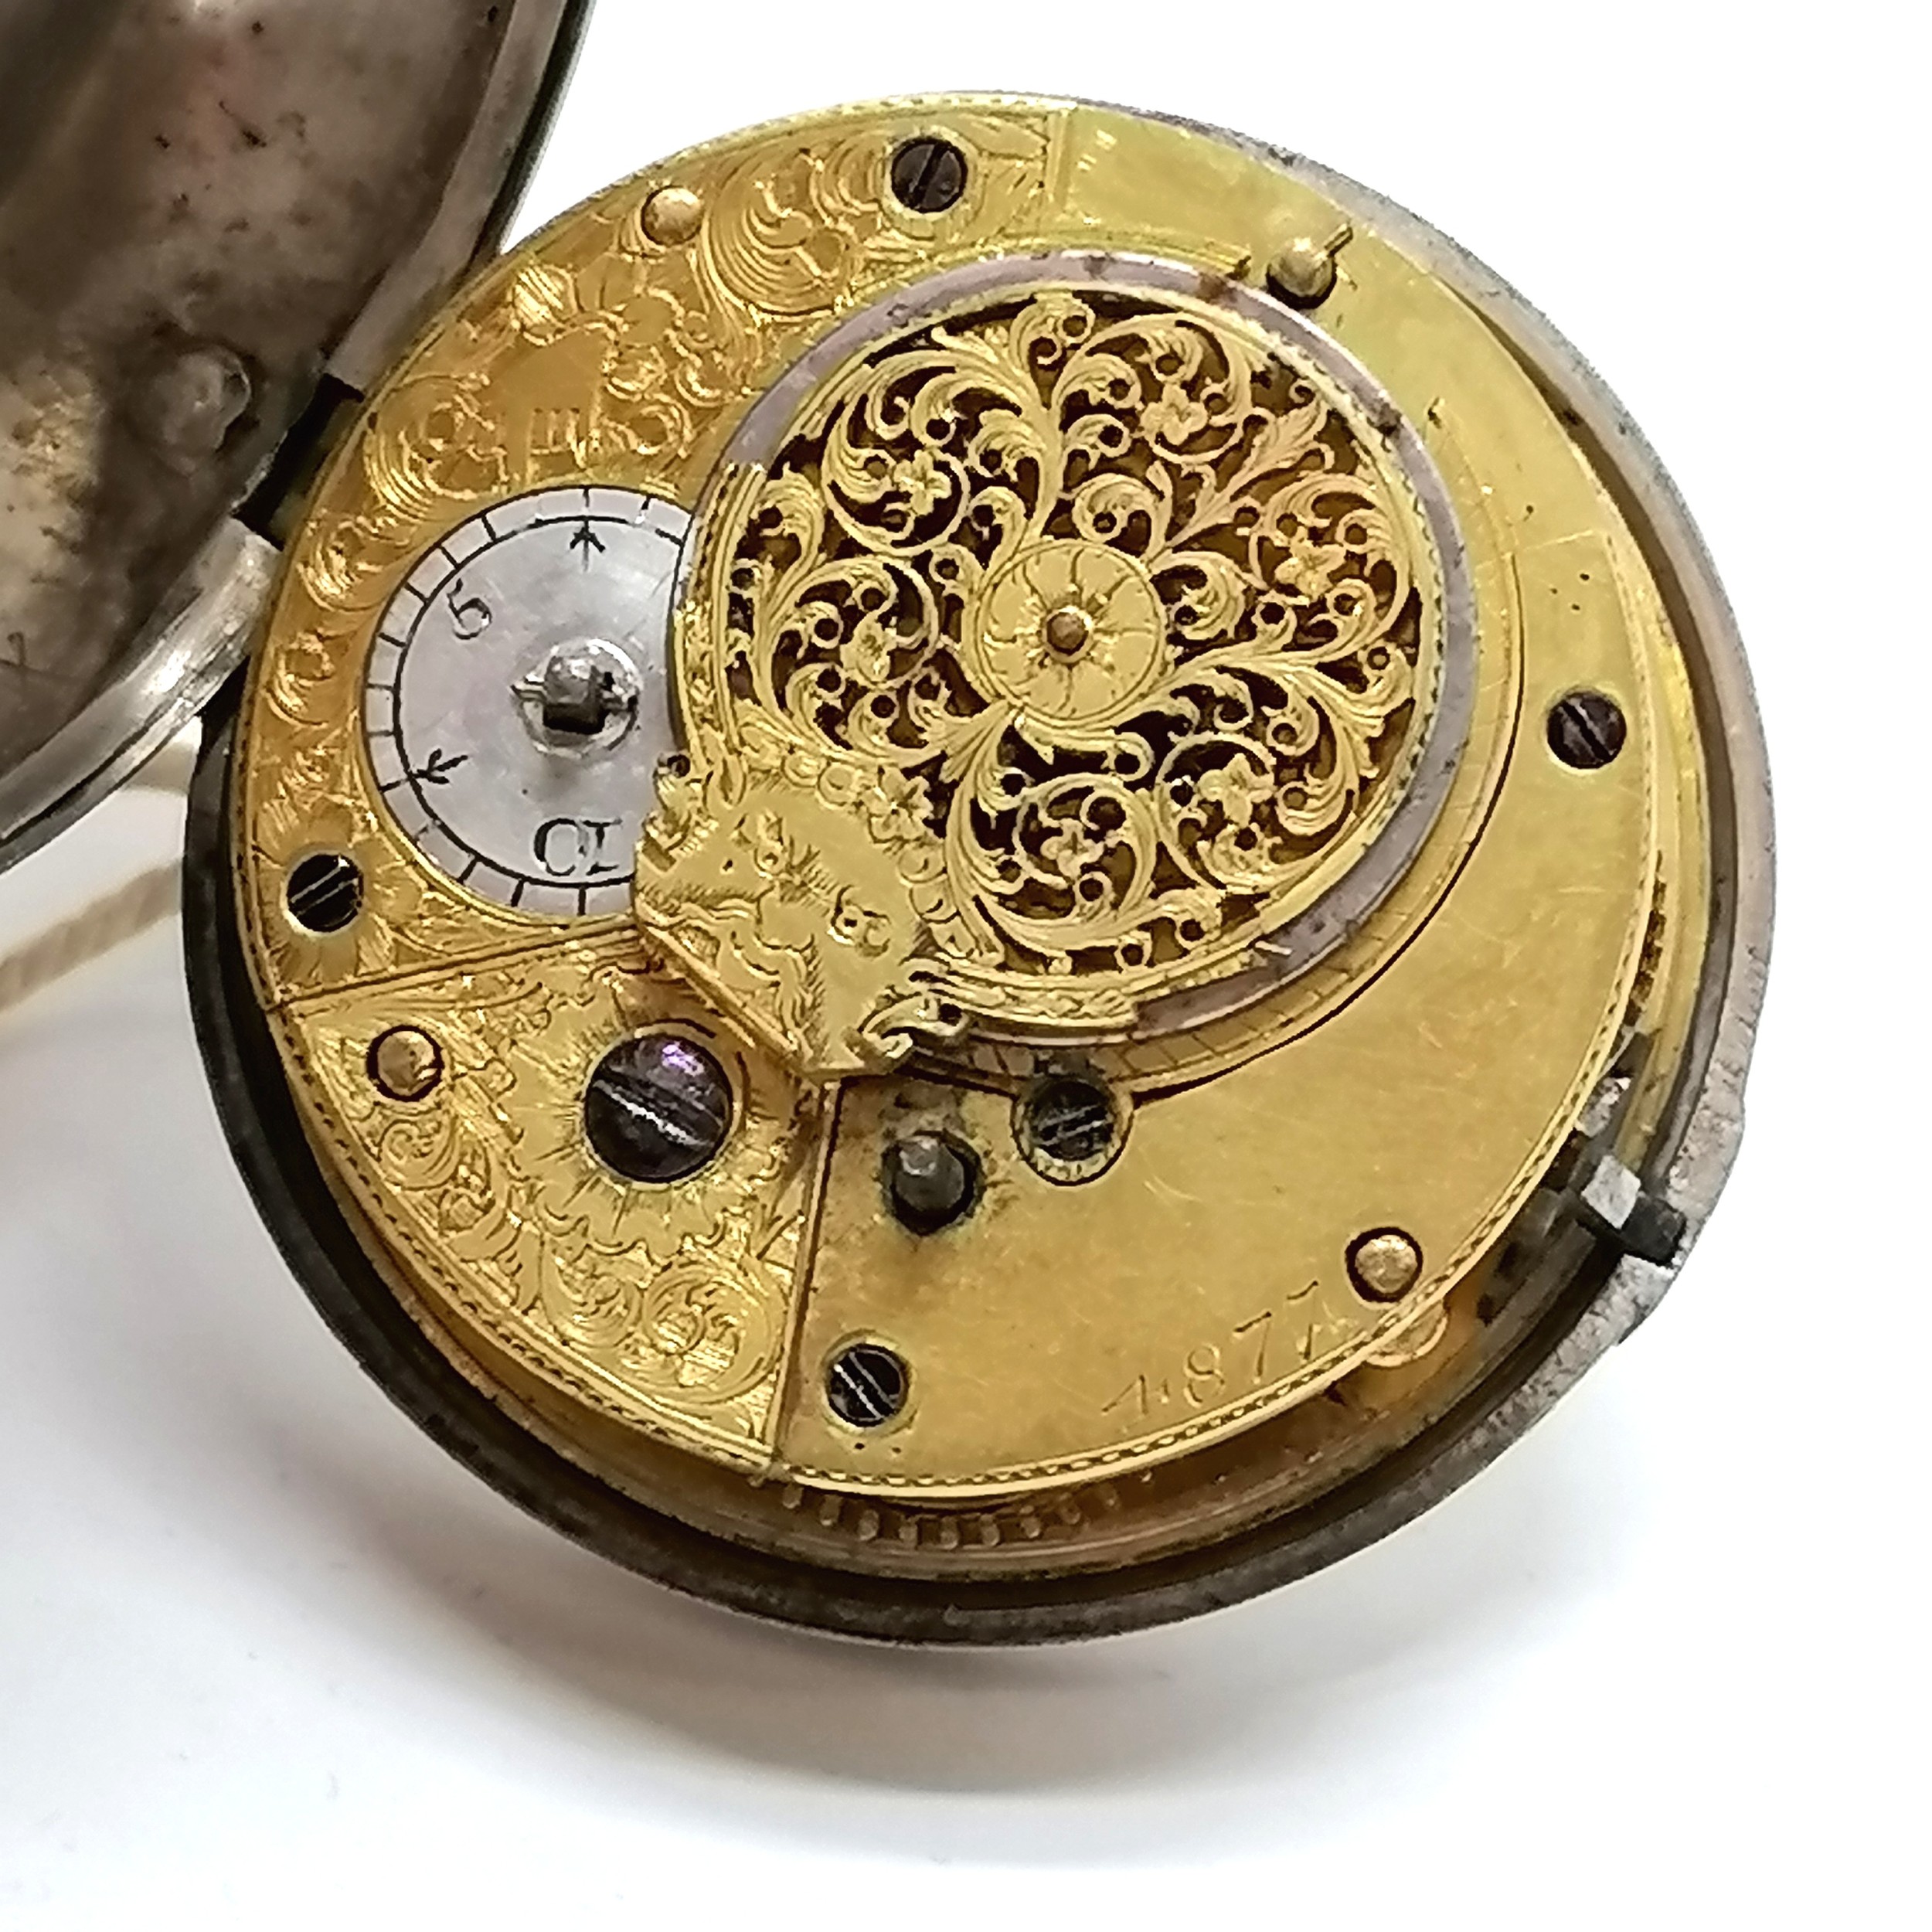 Antique silver pair cased fusee pocket watch - silver 58mm outer case 1799 by John Taylor, has - Image 4 of 4